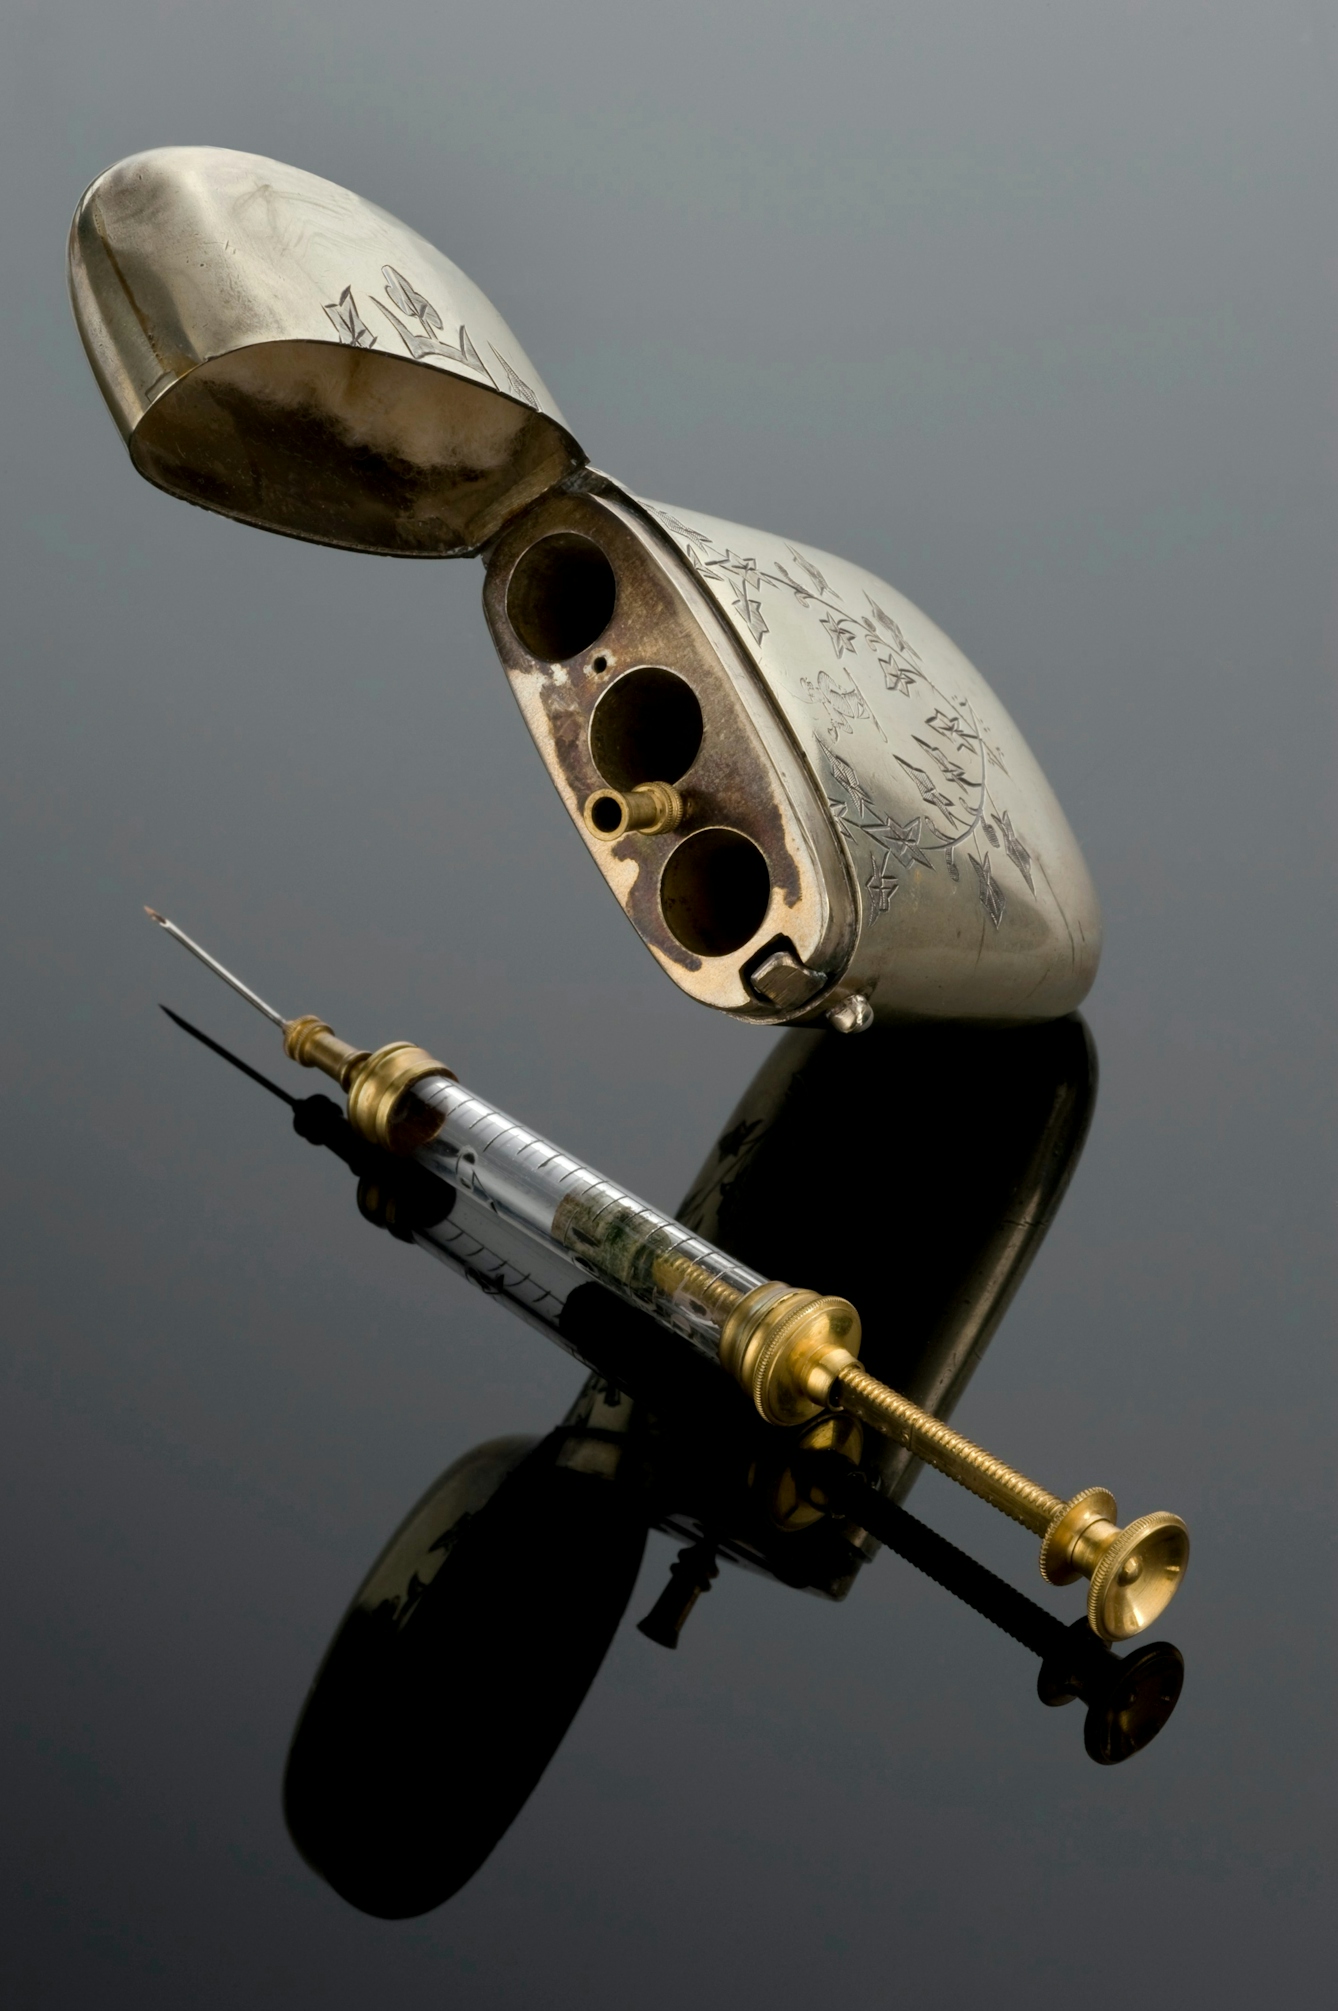 Gold-coloured syringe with a glass tube with measure-lines on, and an engraved rounded metal case similar to a cigarette-case.